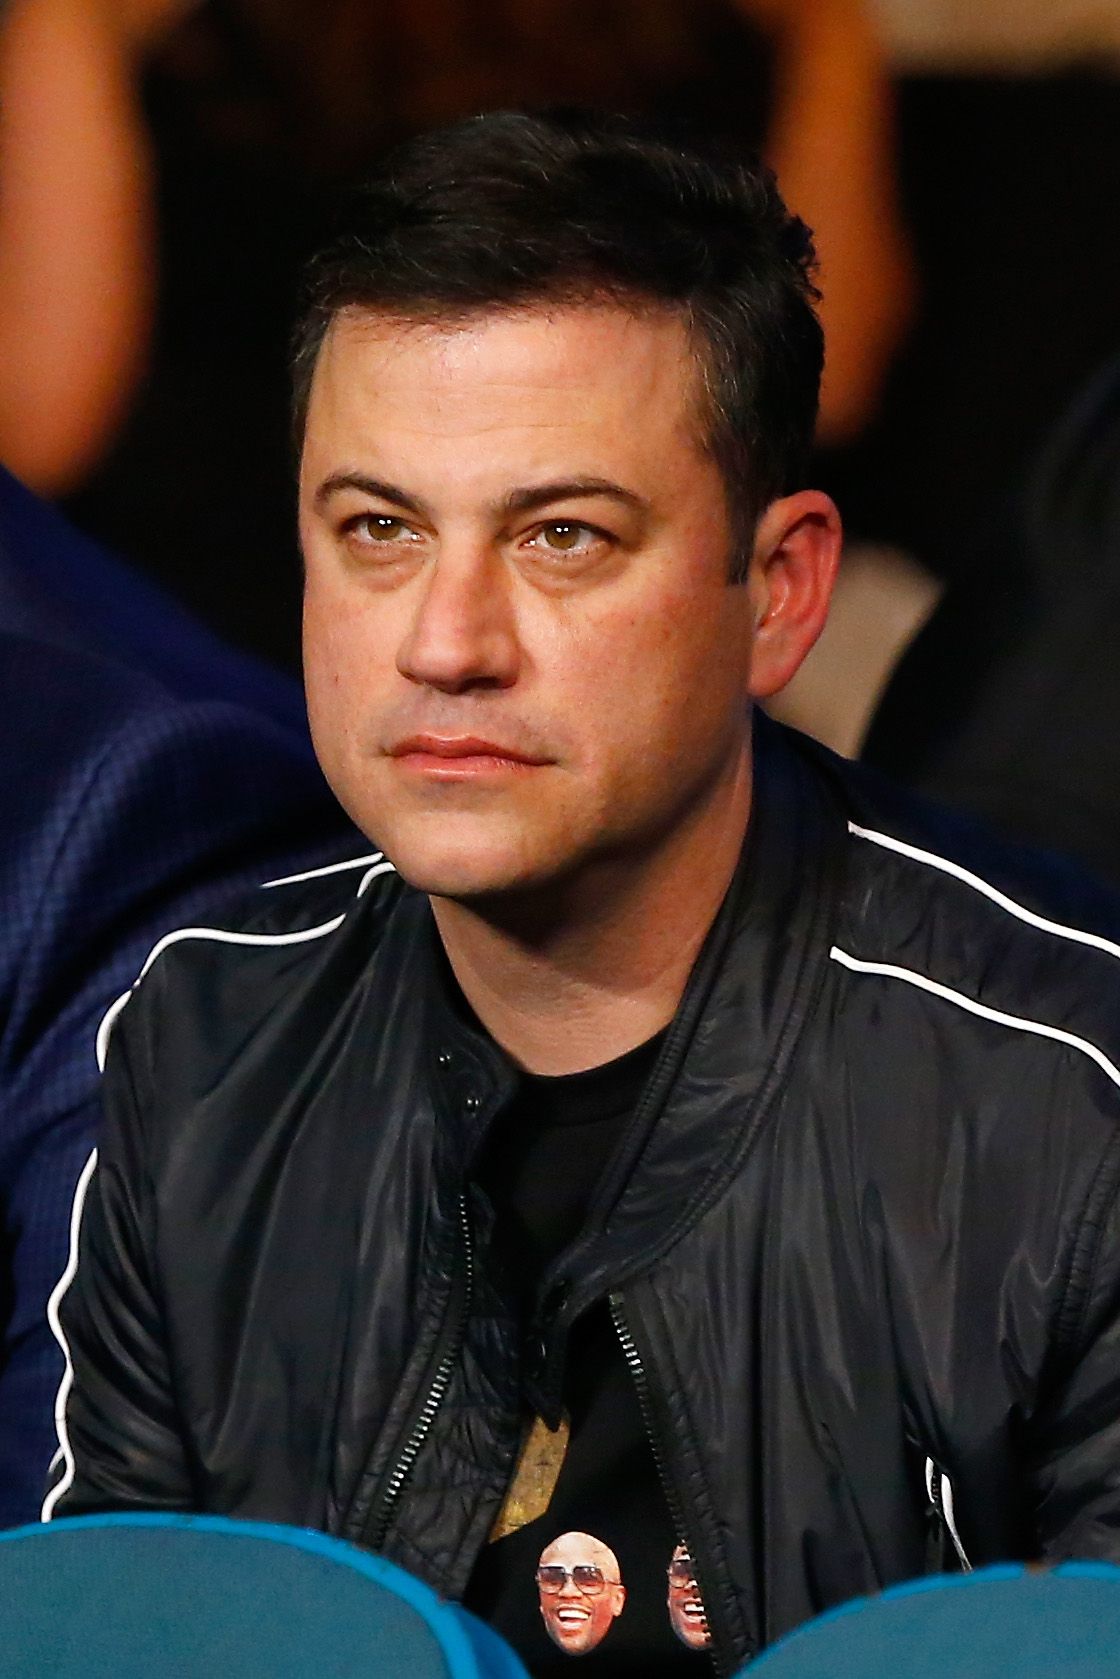 Jimmy Kimmel at a WBO featherweight championship bout on May 2, 2015, in Las Vegas, Nevada | Photo: Al Bello/Getty Images